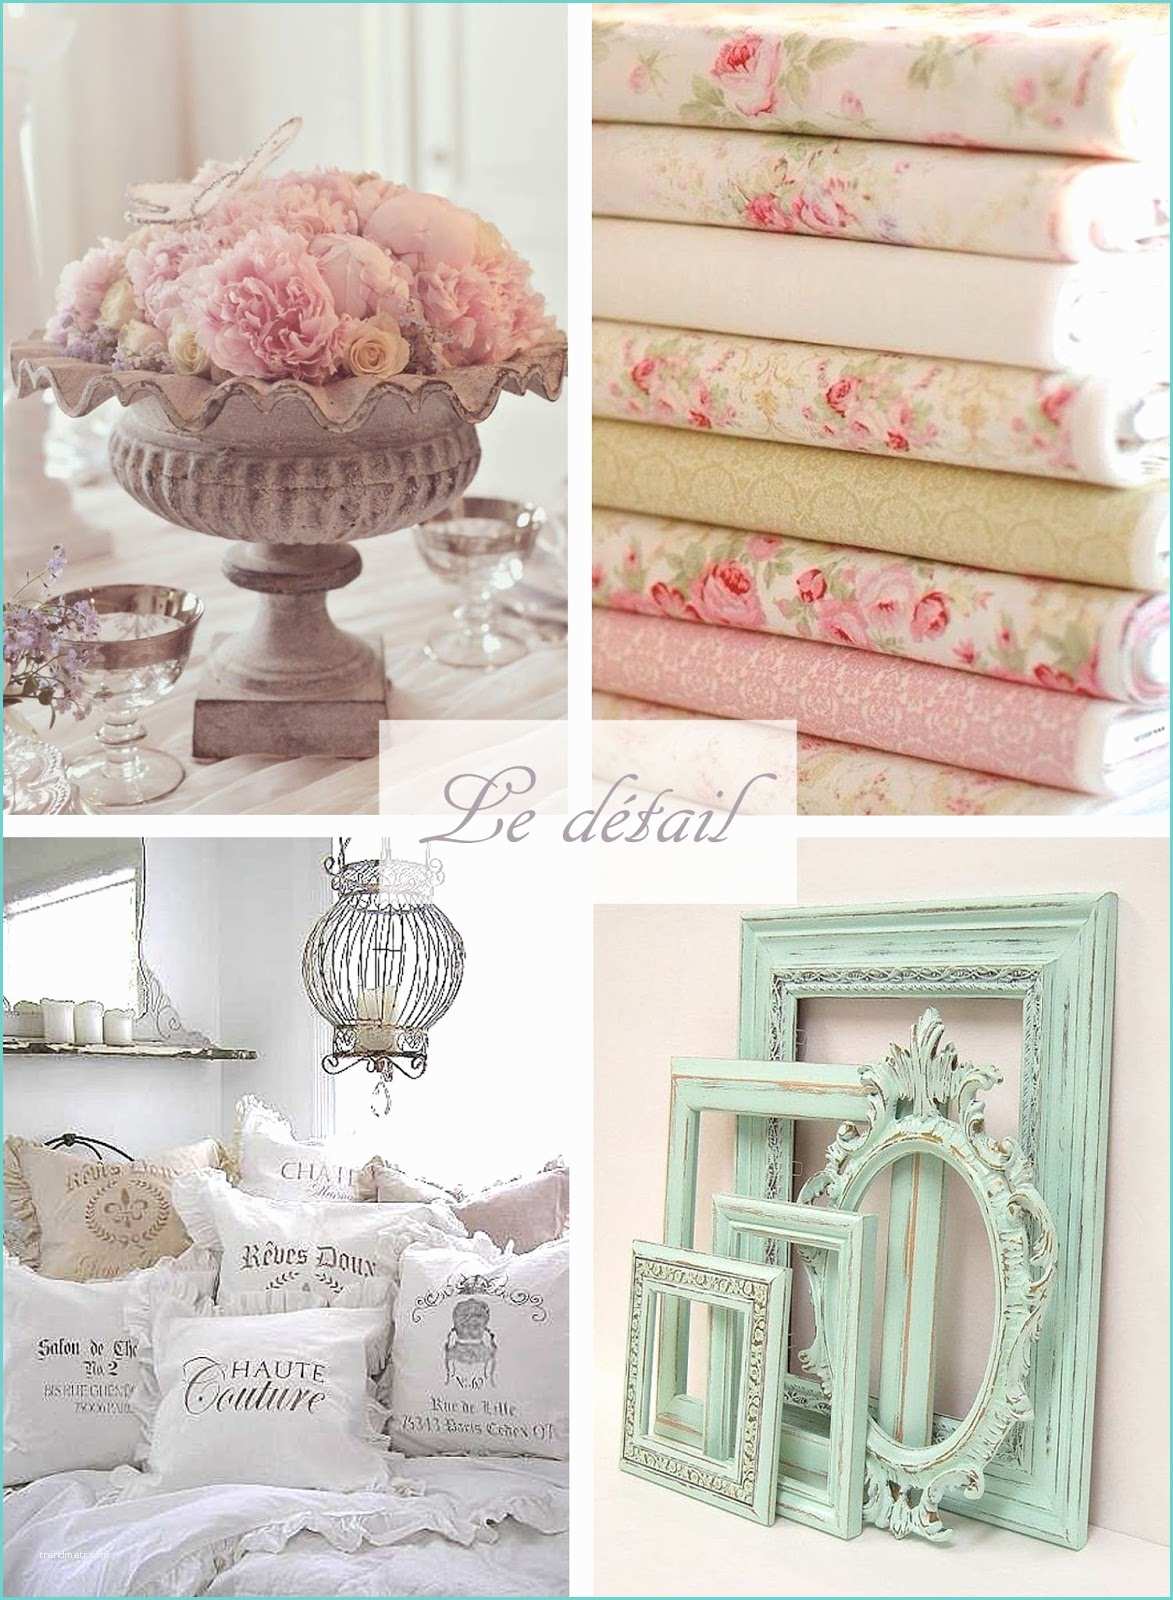 Chambre Style Shabby Chic Hey Deer Lili [mcd] Inspiration Pour Une Chambre Shabby Chic